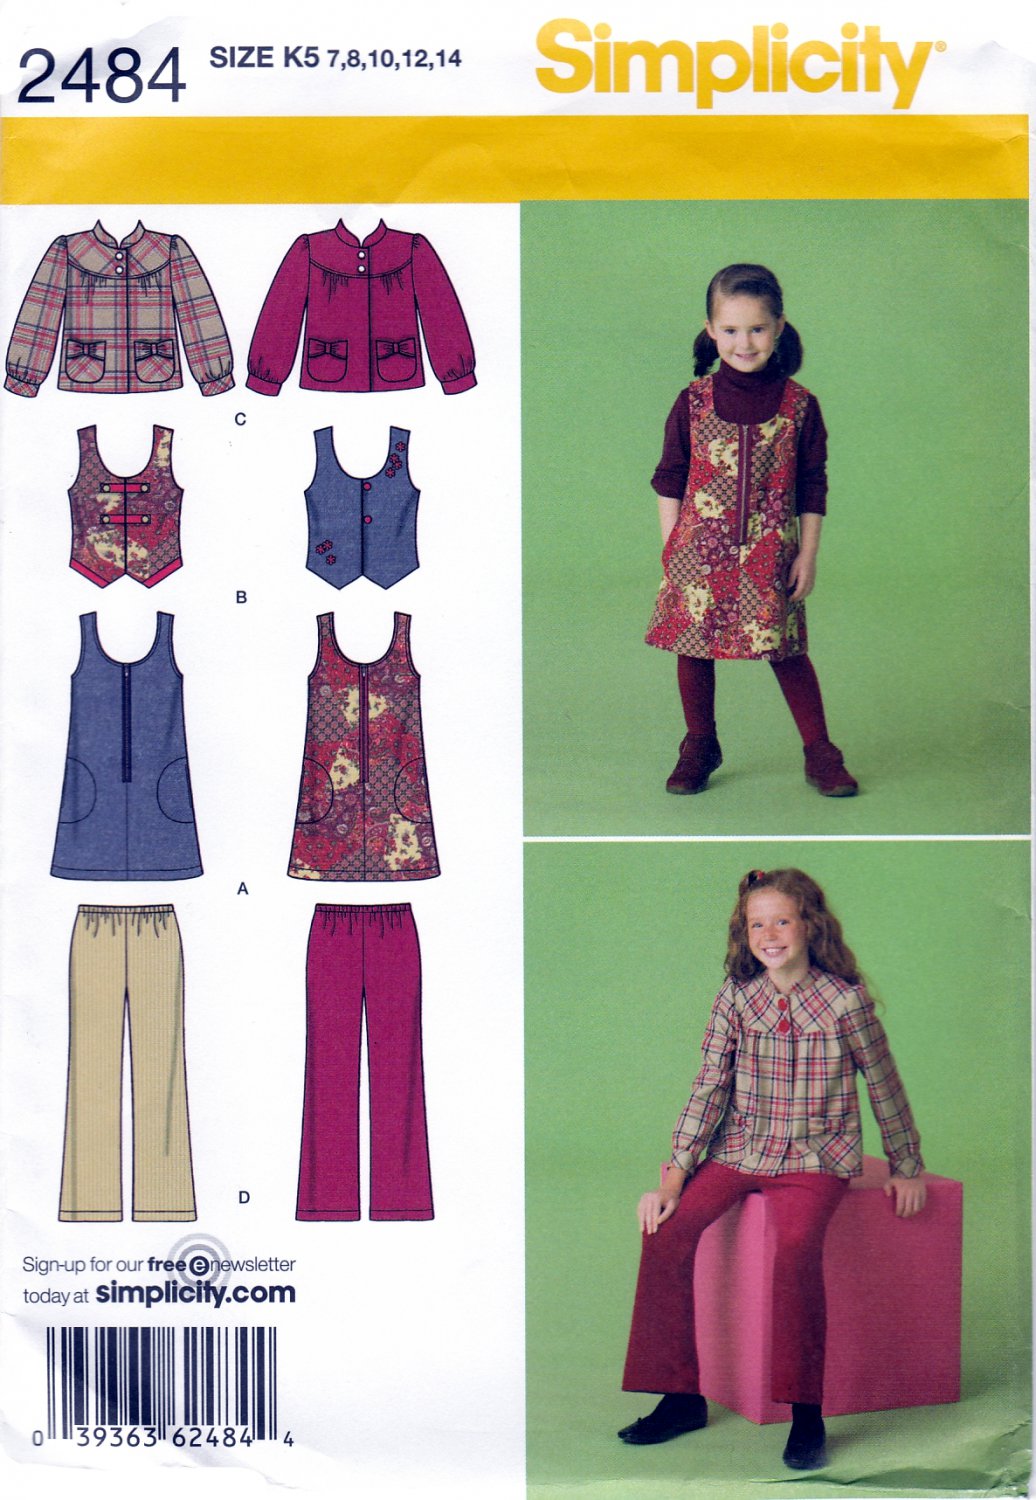 Simplicity 2484 Girls Childs Vest Jumper Jacket Cropped Pants Sewing Pattern Sizes 7-8-10-12-14